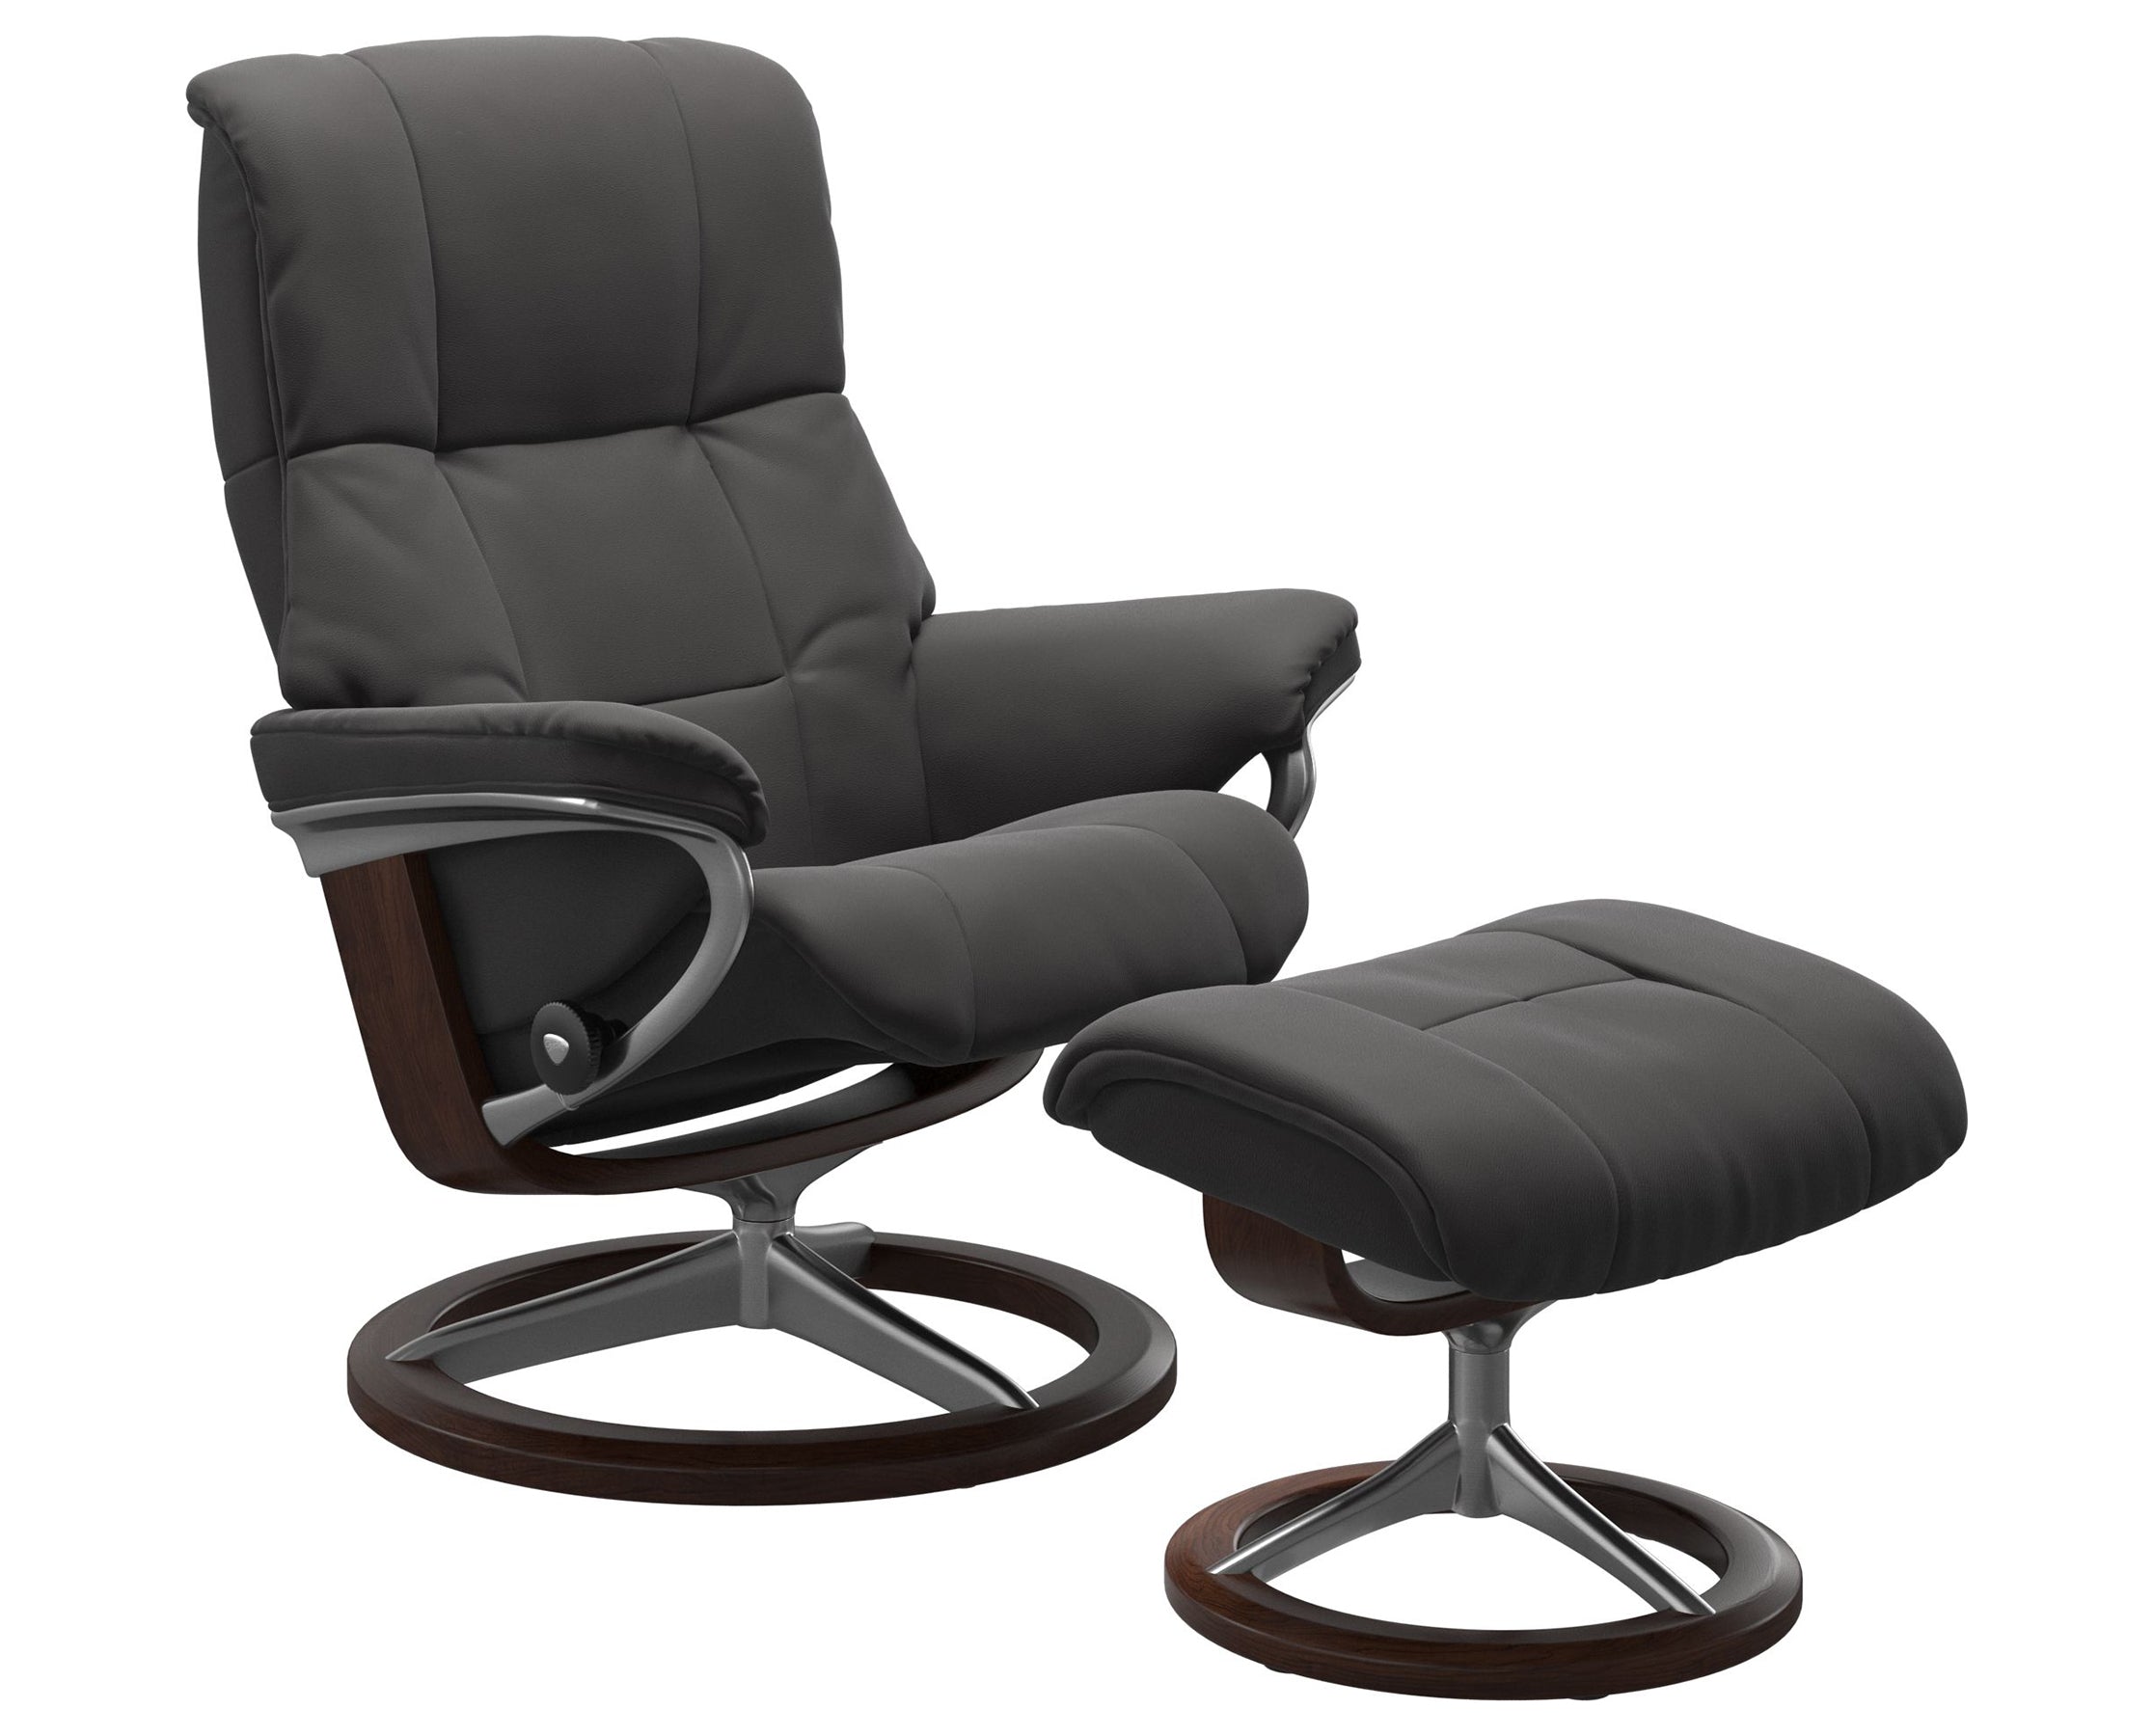 Paloma Leather Rock S/M/L and Brown Base | Stressless Mayfair Signature Recliner | Valley Ridge Furniture